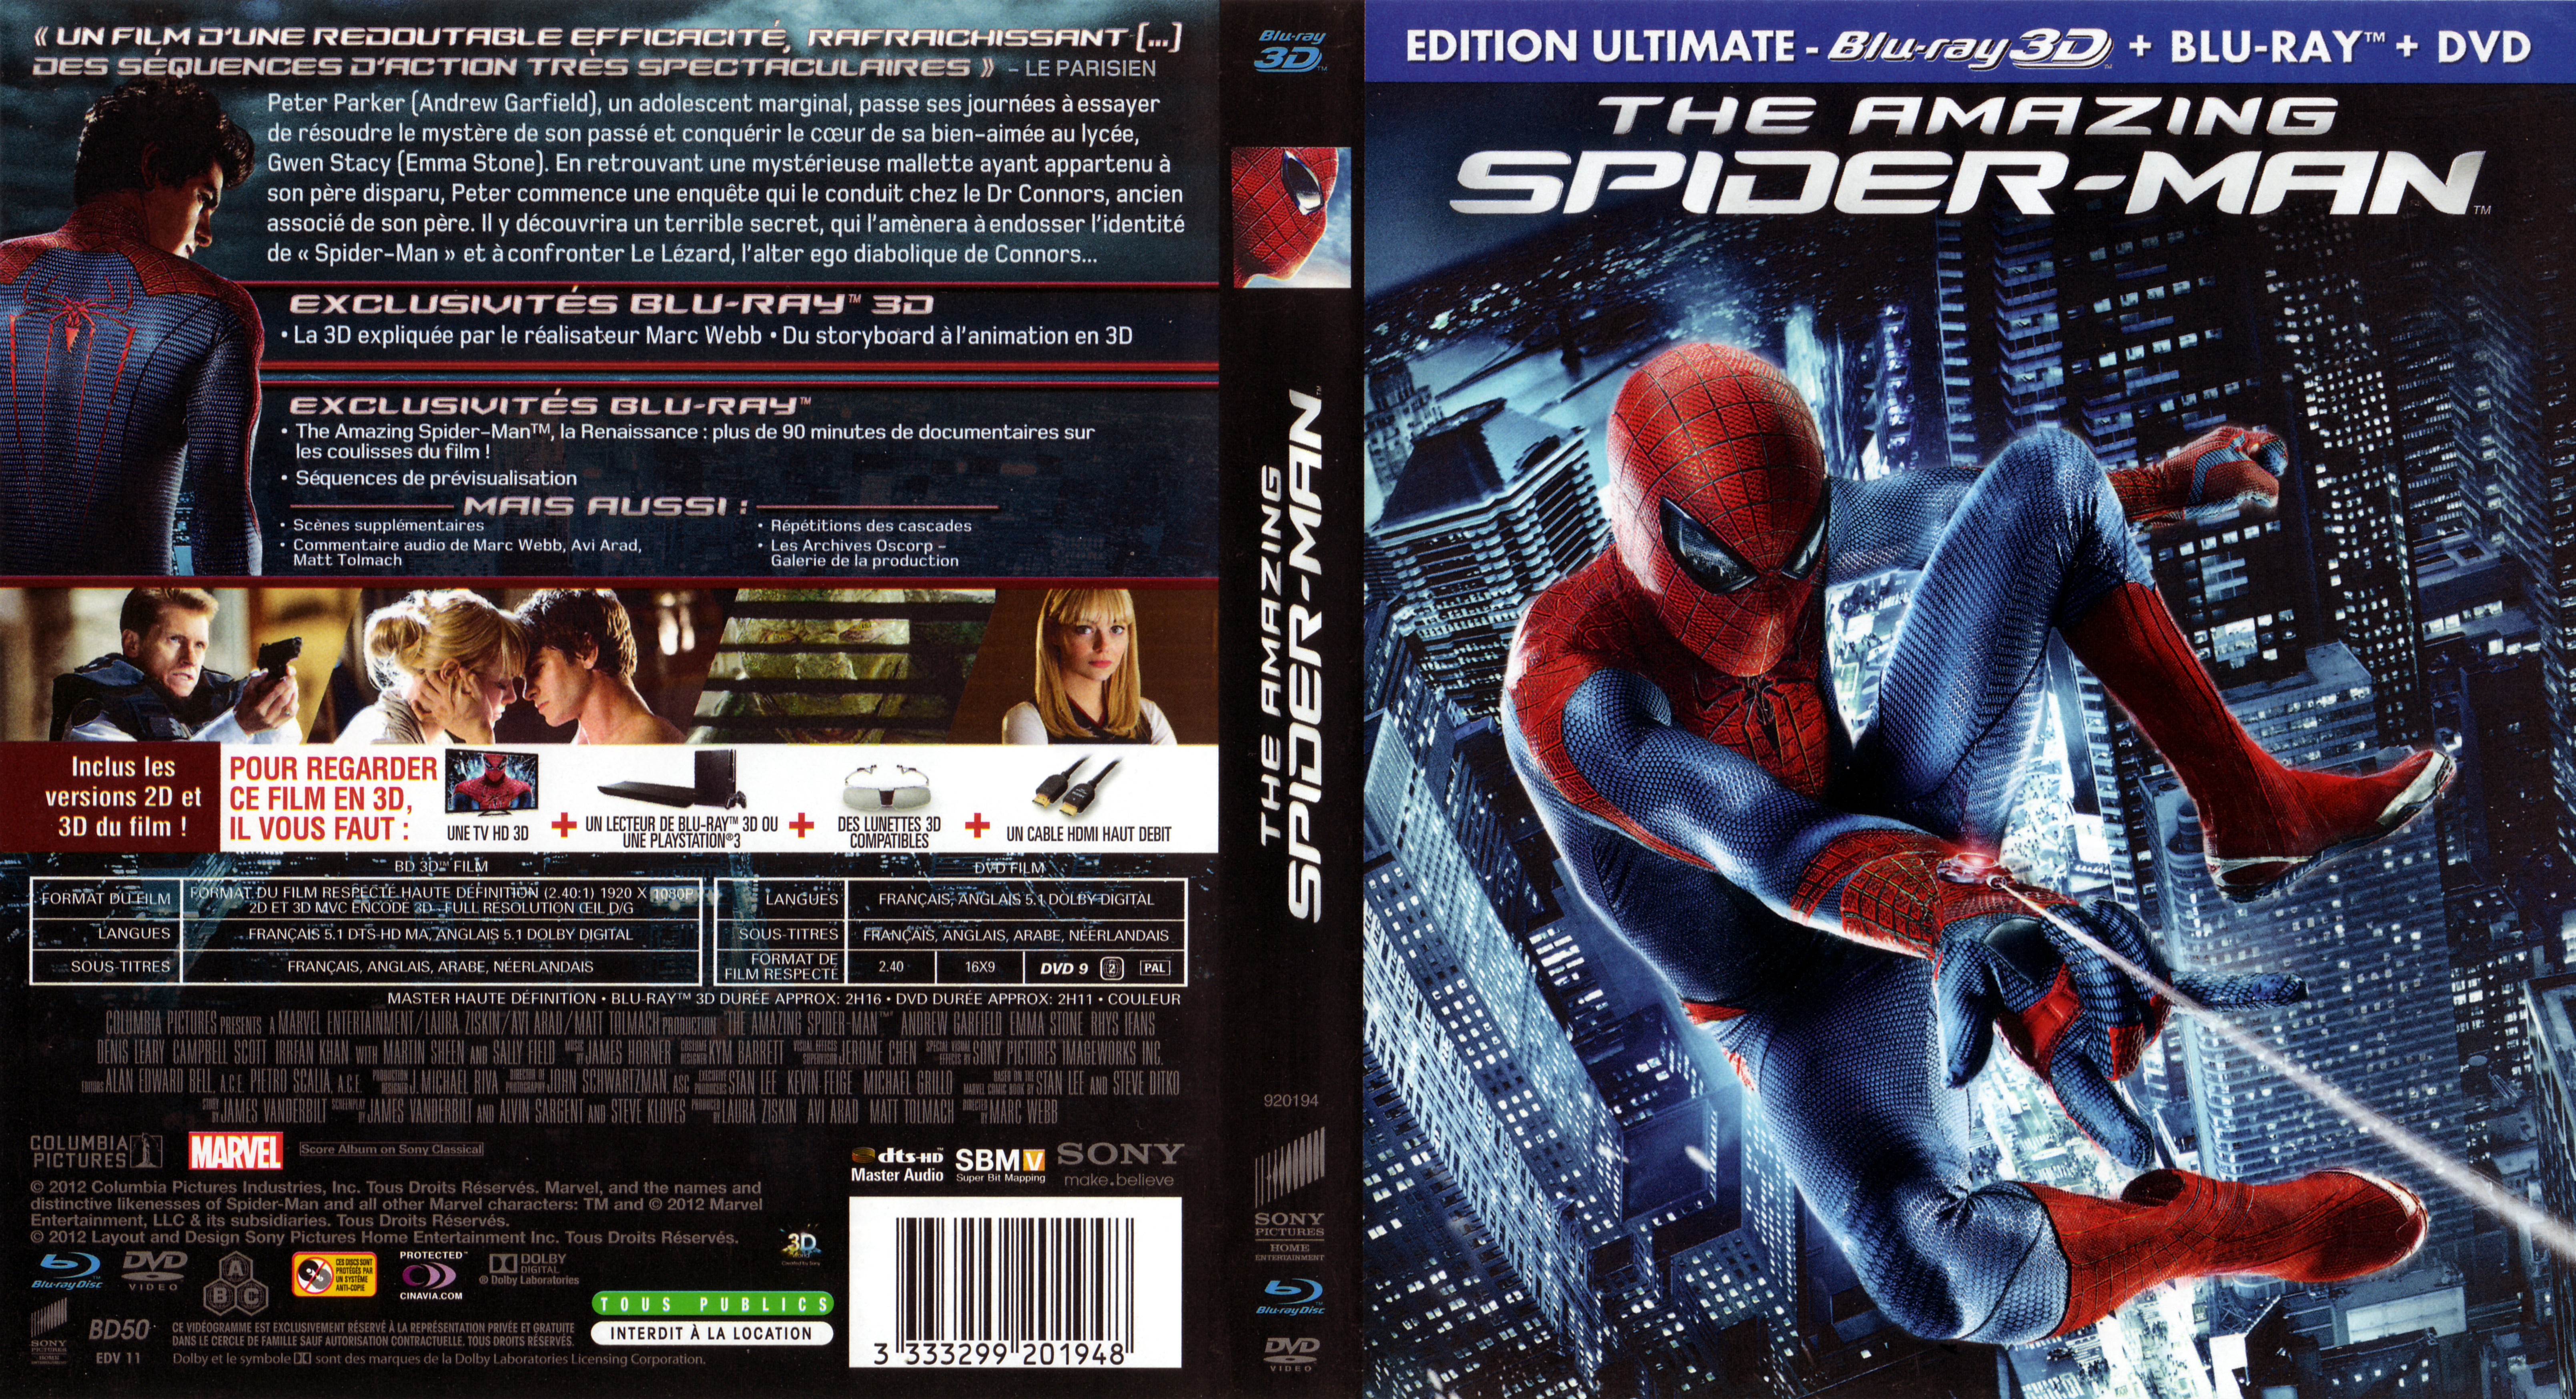 Jaquette DVD The amazing spider-man 3D (BLU-RAY)